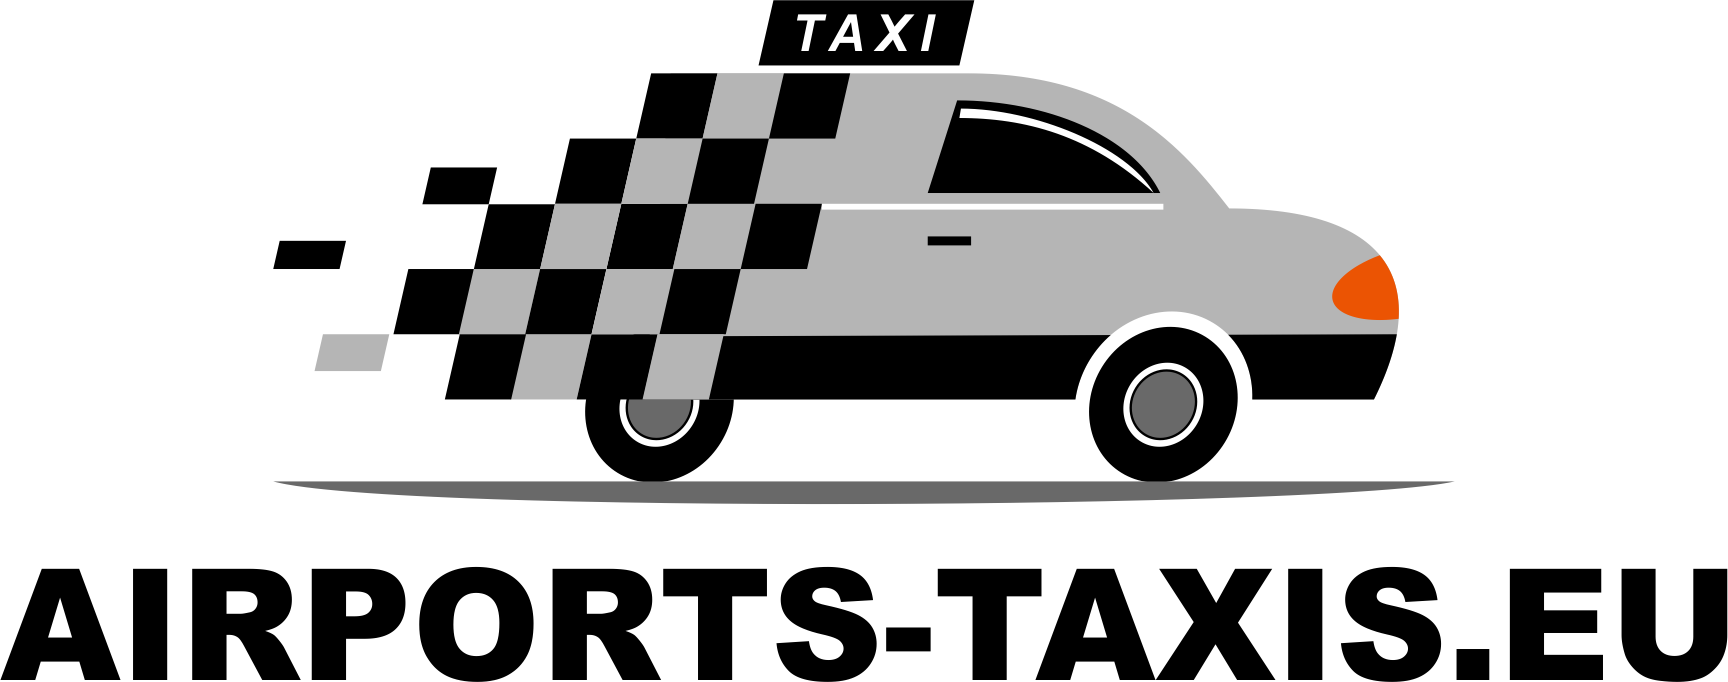 Taxi Service, AirPort Taxi, Airport Taxi Lier, Luchthavenvervoer, Luchthavenvervoer Lier